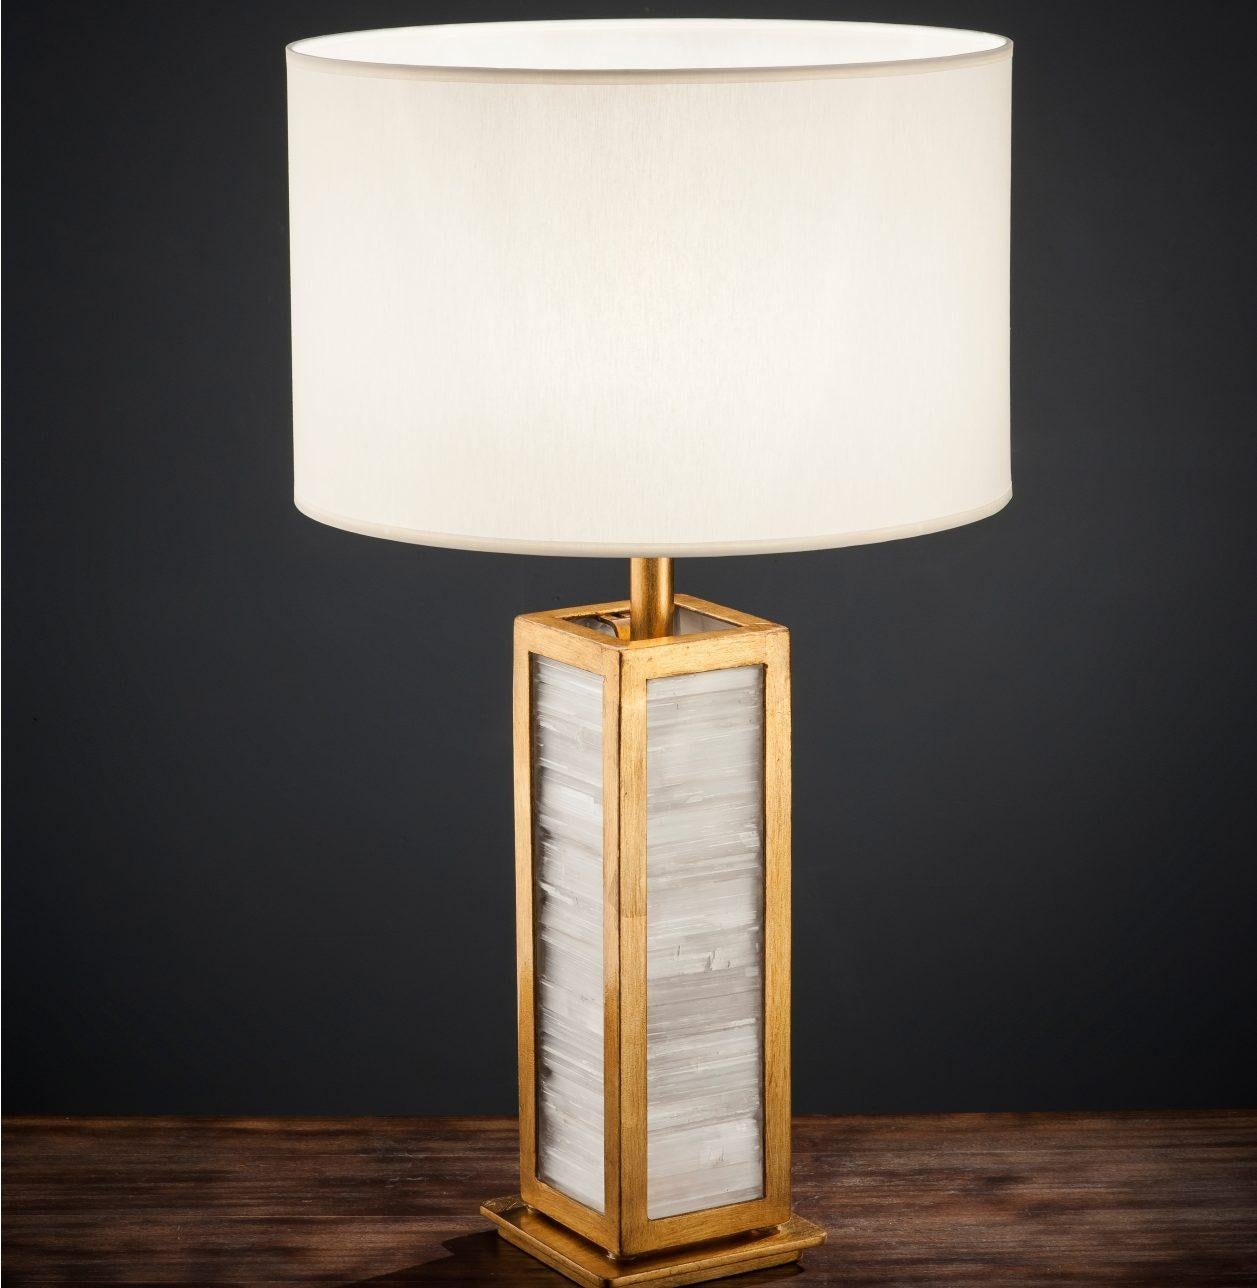 Selenite table lamp by Aver
Dimensions: Diameter 40 x Height 80 cm 
Materials: Aluminum with gold leaf. Natural selenite crystal
Lighting: 01 x E27
All our lamps can be wired according to each country. If sold to the USA it will be wired for the USA